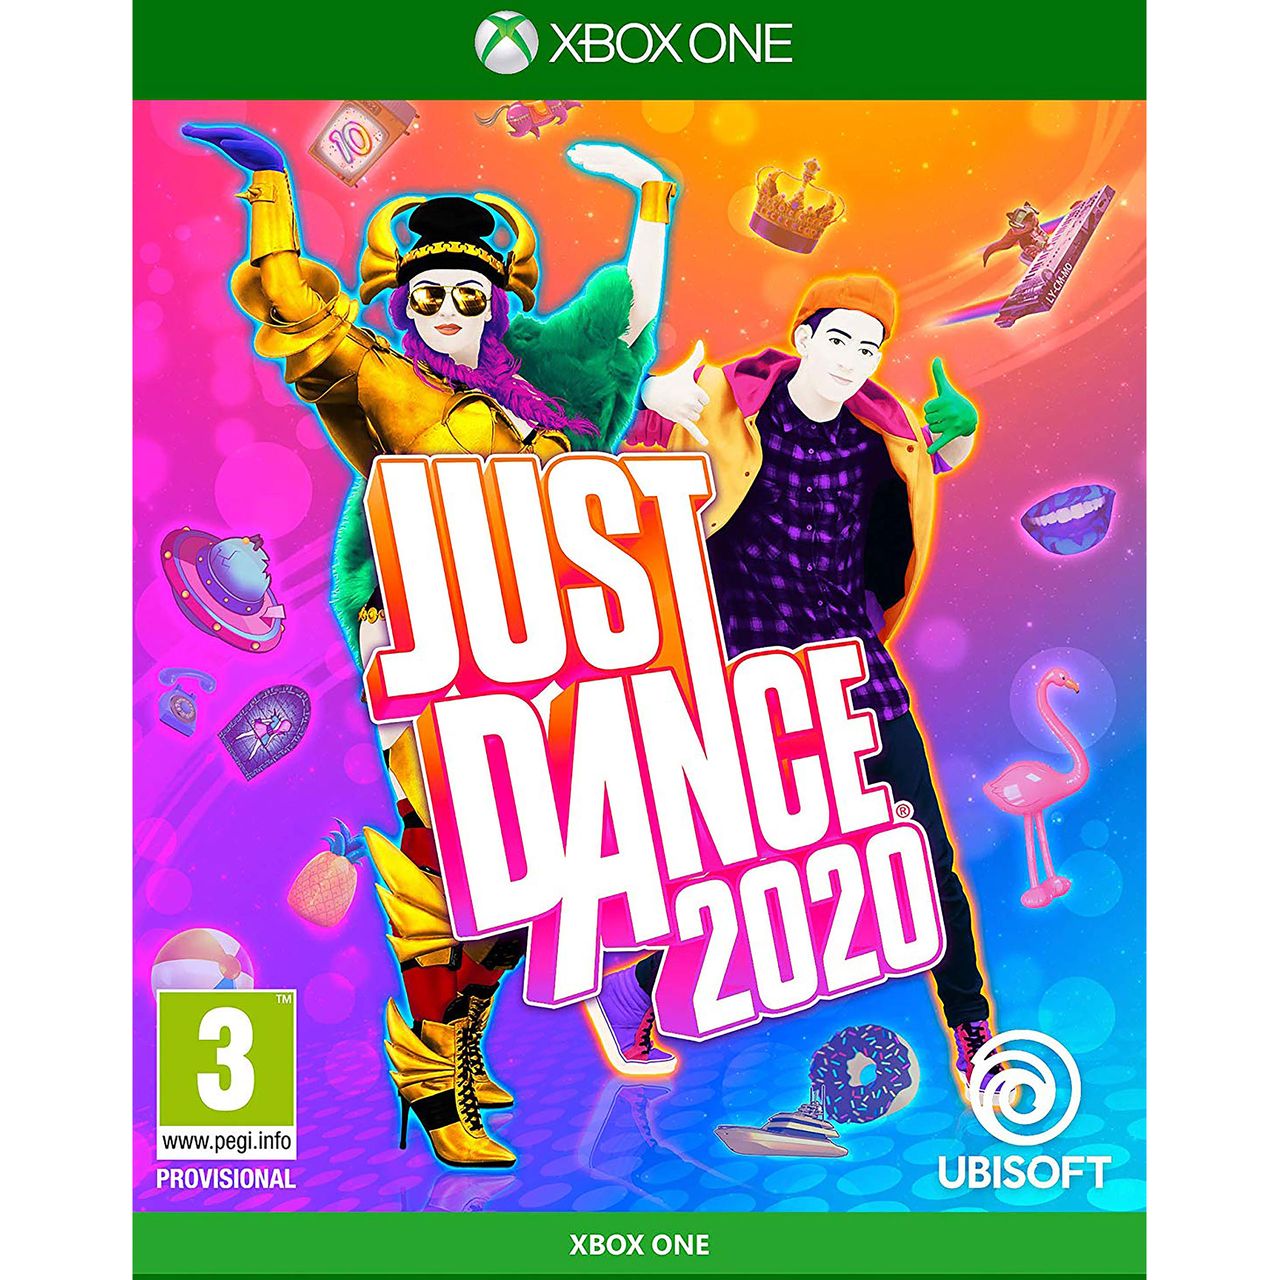 Just Dance 2020 for Xbox One Review